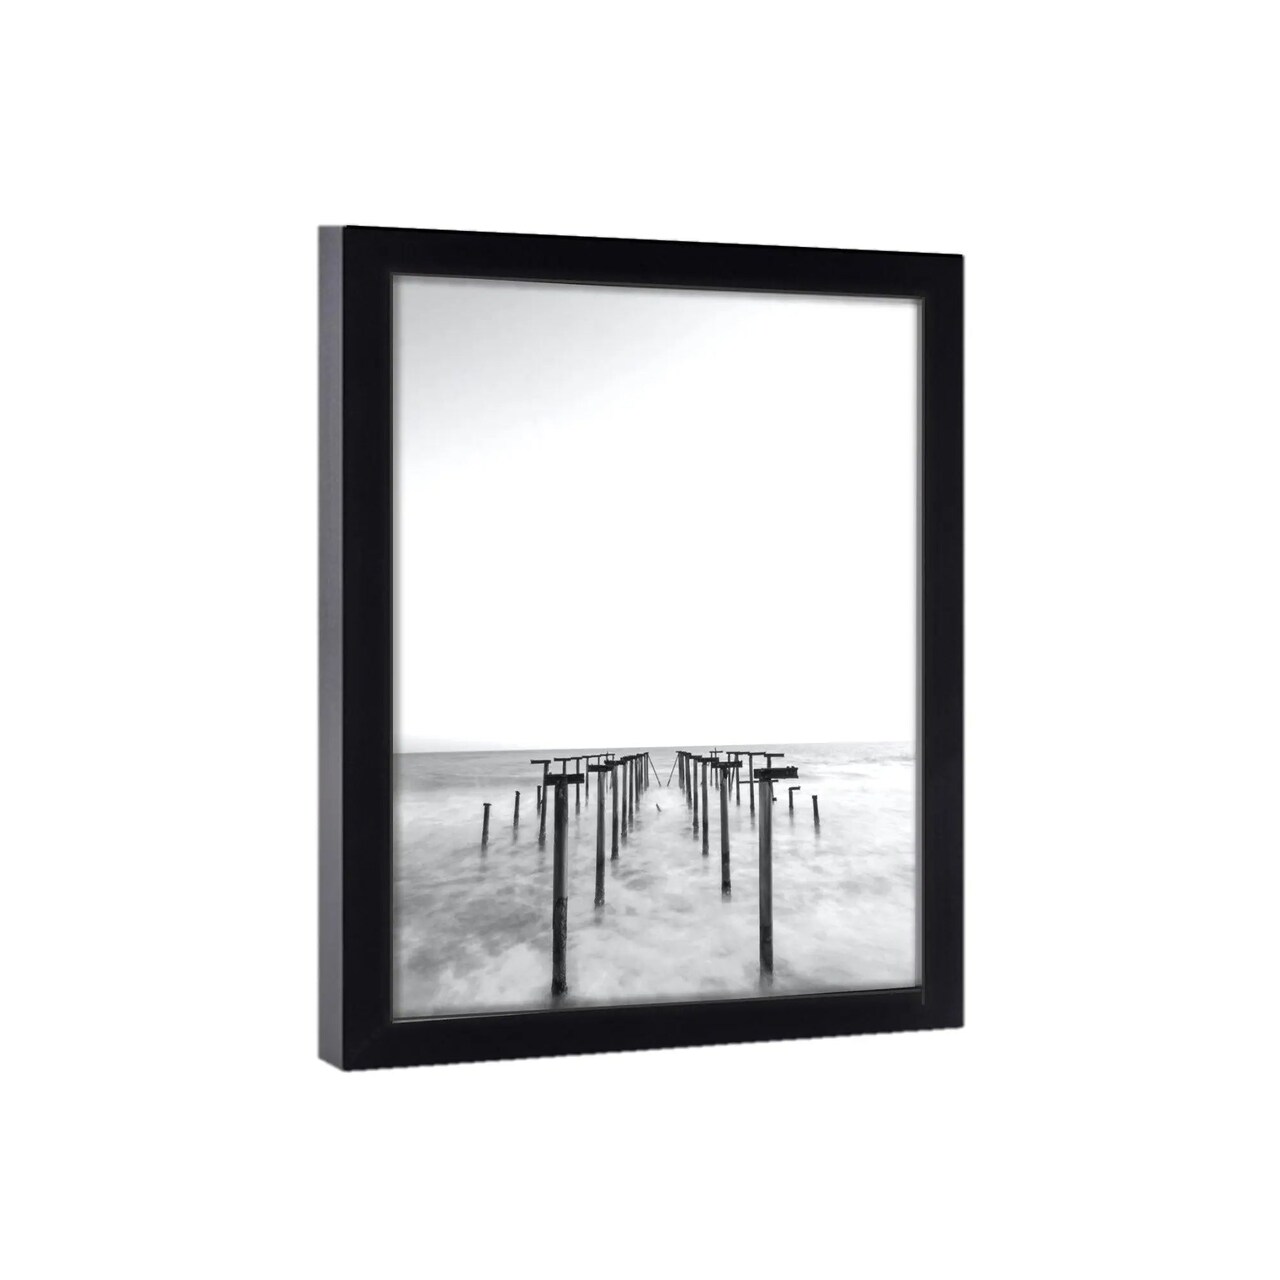 Gallery Wall 24x30 Picture Frame Black 24x30 Frame 24 x 30 Poster Frames 24 x 30